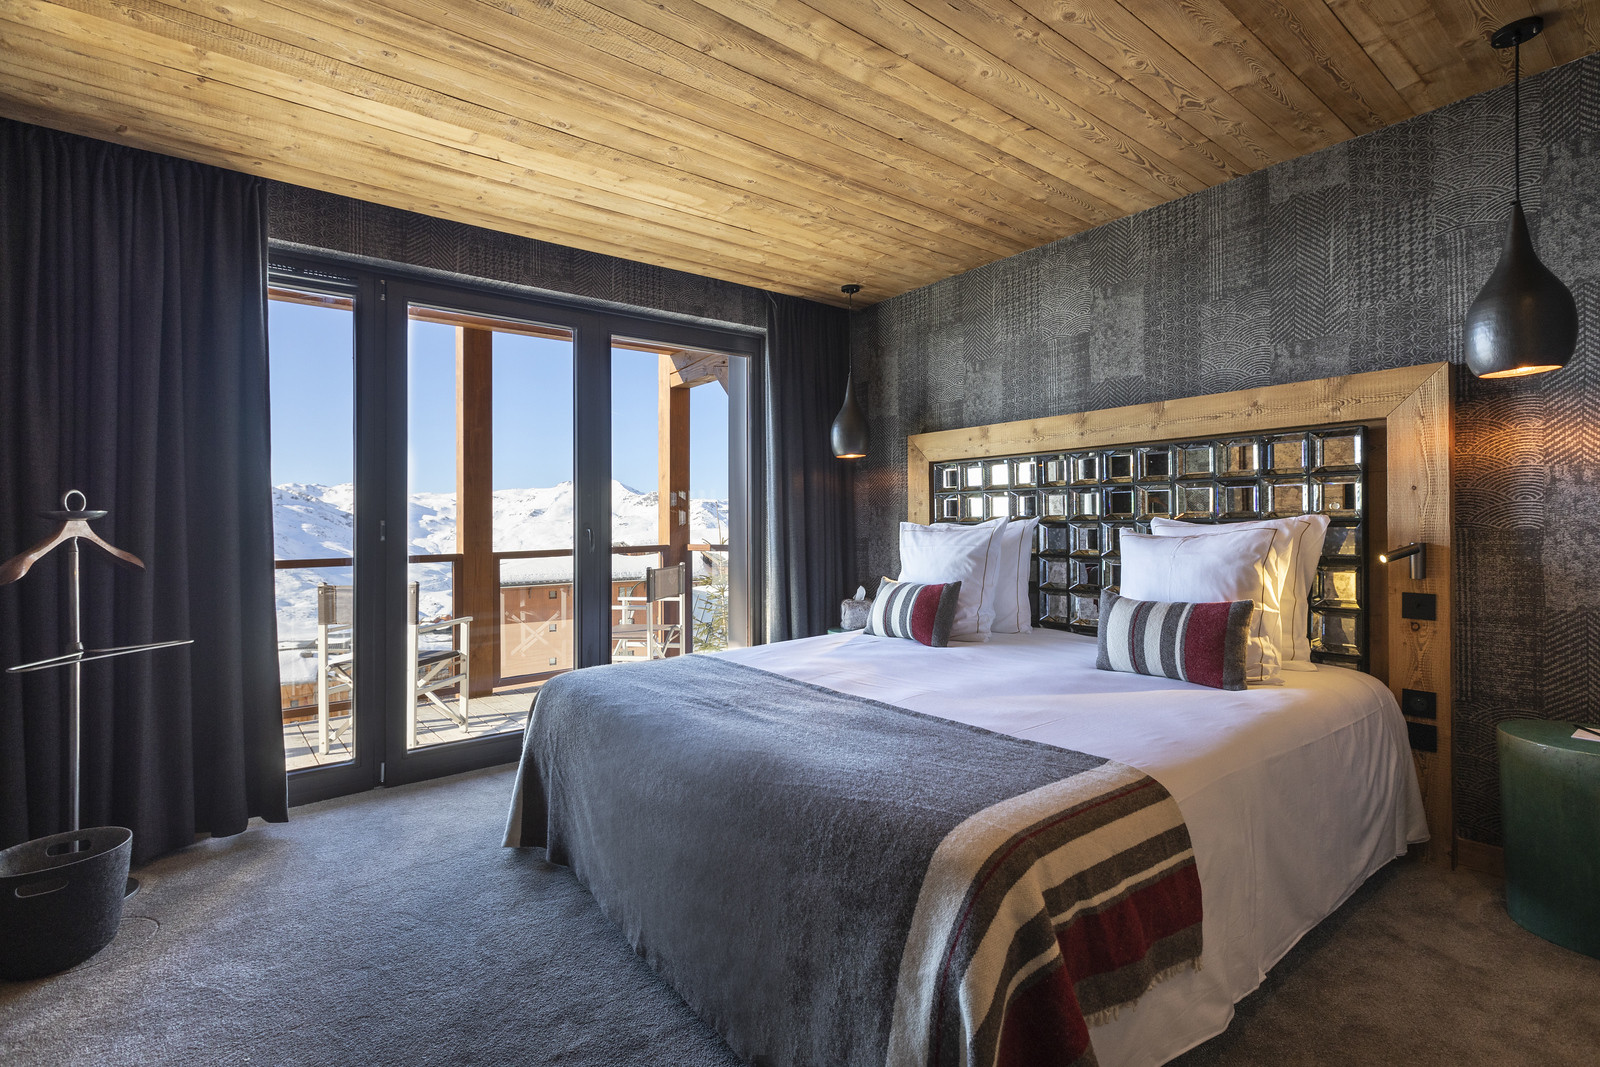 val-thorens-location-chalet-luxe-torinan